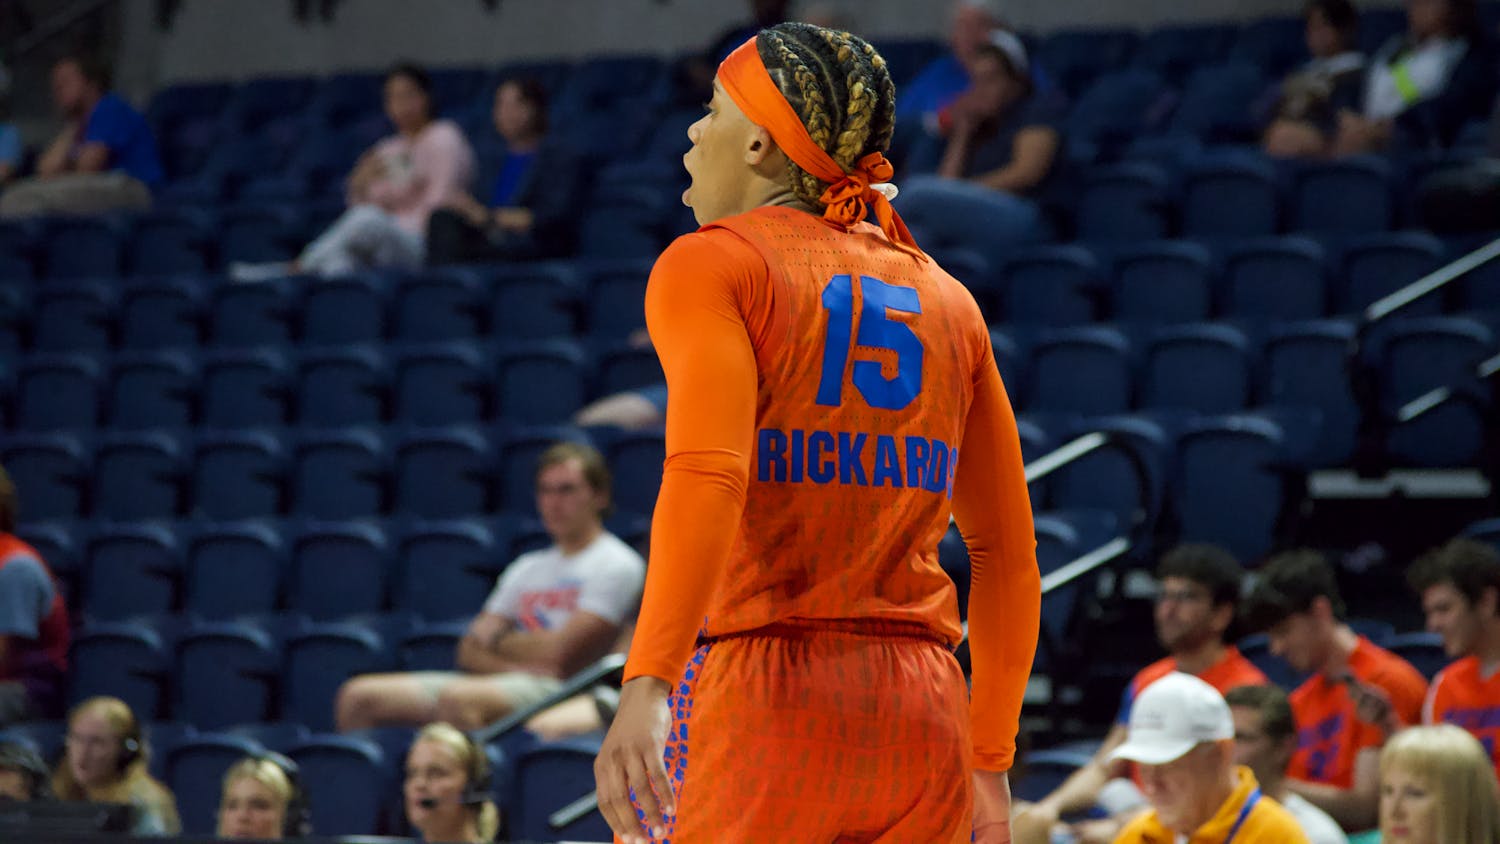 Florida guard Nina Rickards stands on the court during the Gators' 61-54 win over the Texas A&M Aggies Thursday, Feb. 2, 2023.